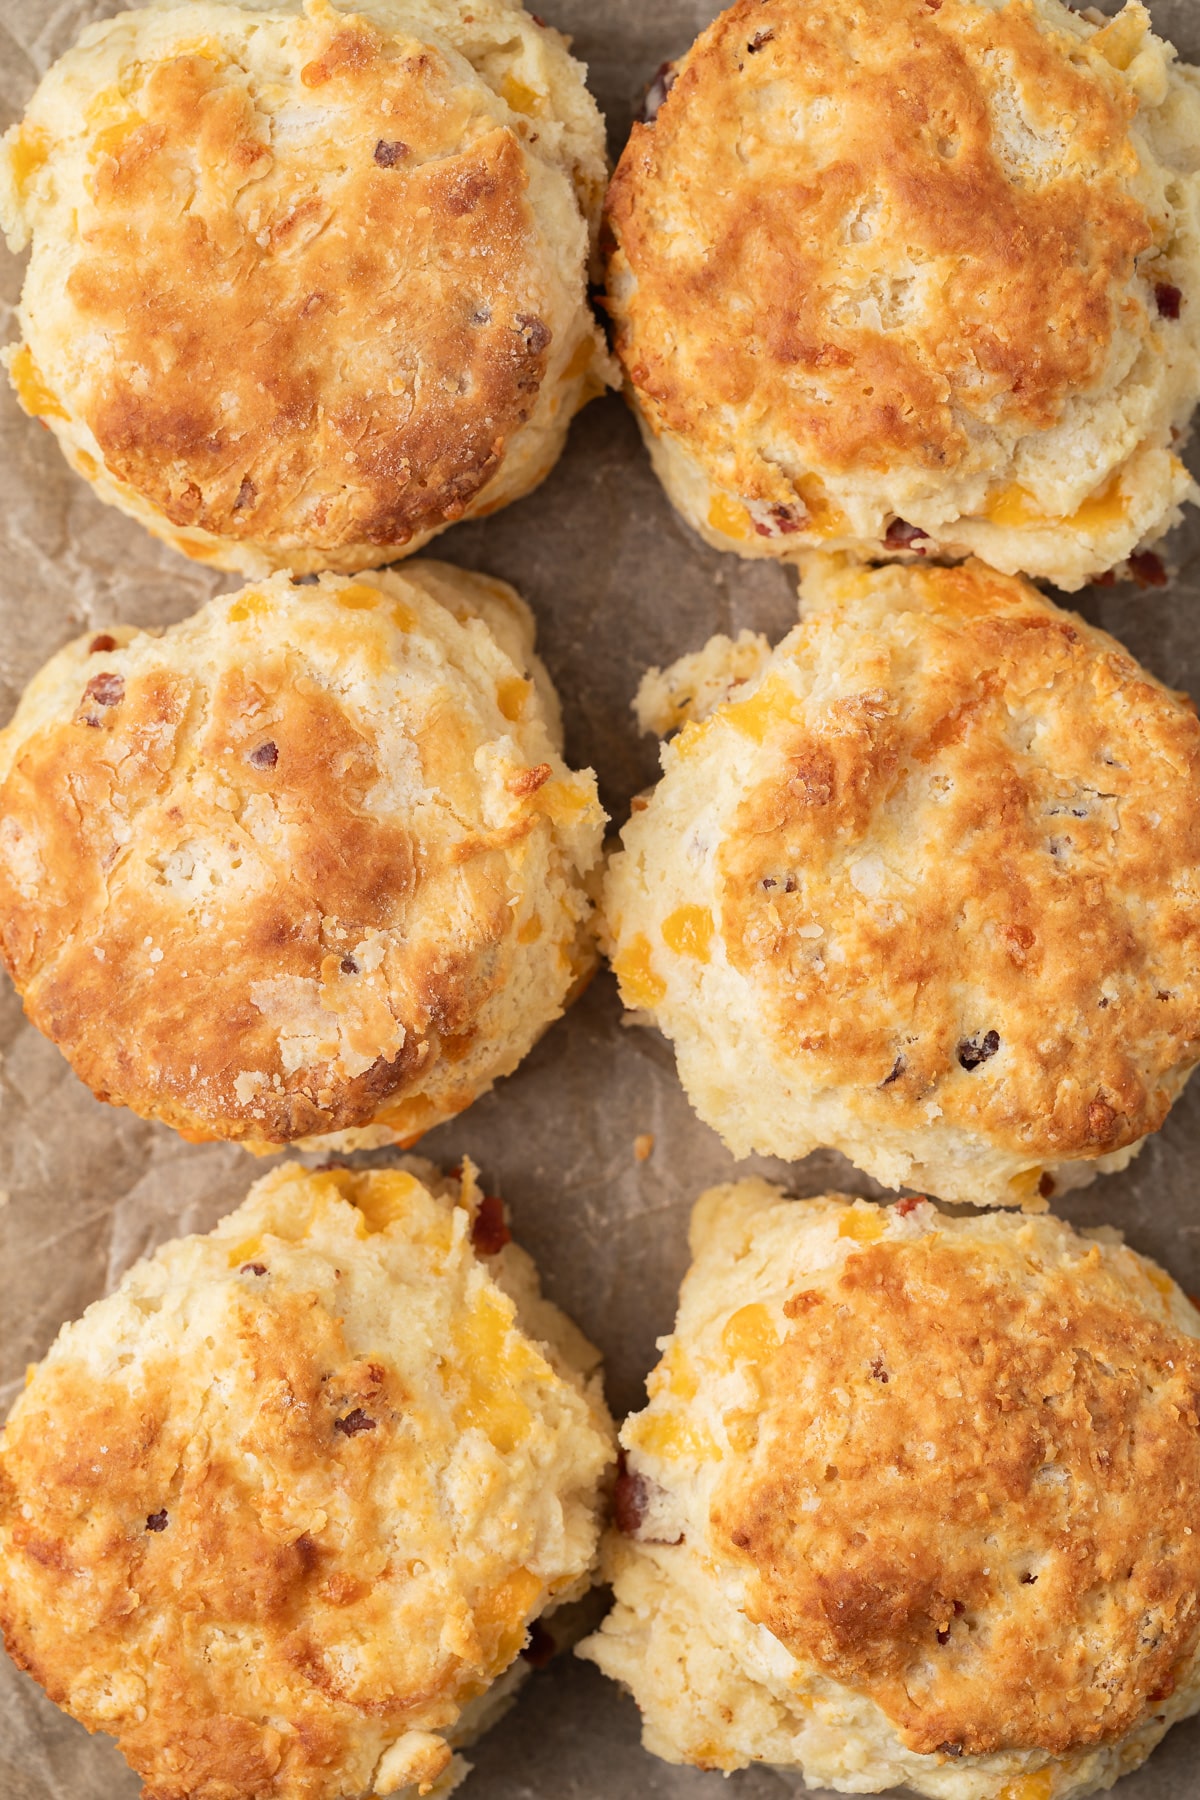 Bacon cheddar biscuits on parchment paper.